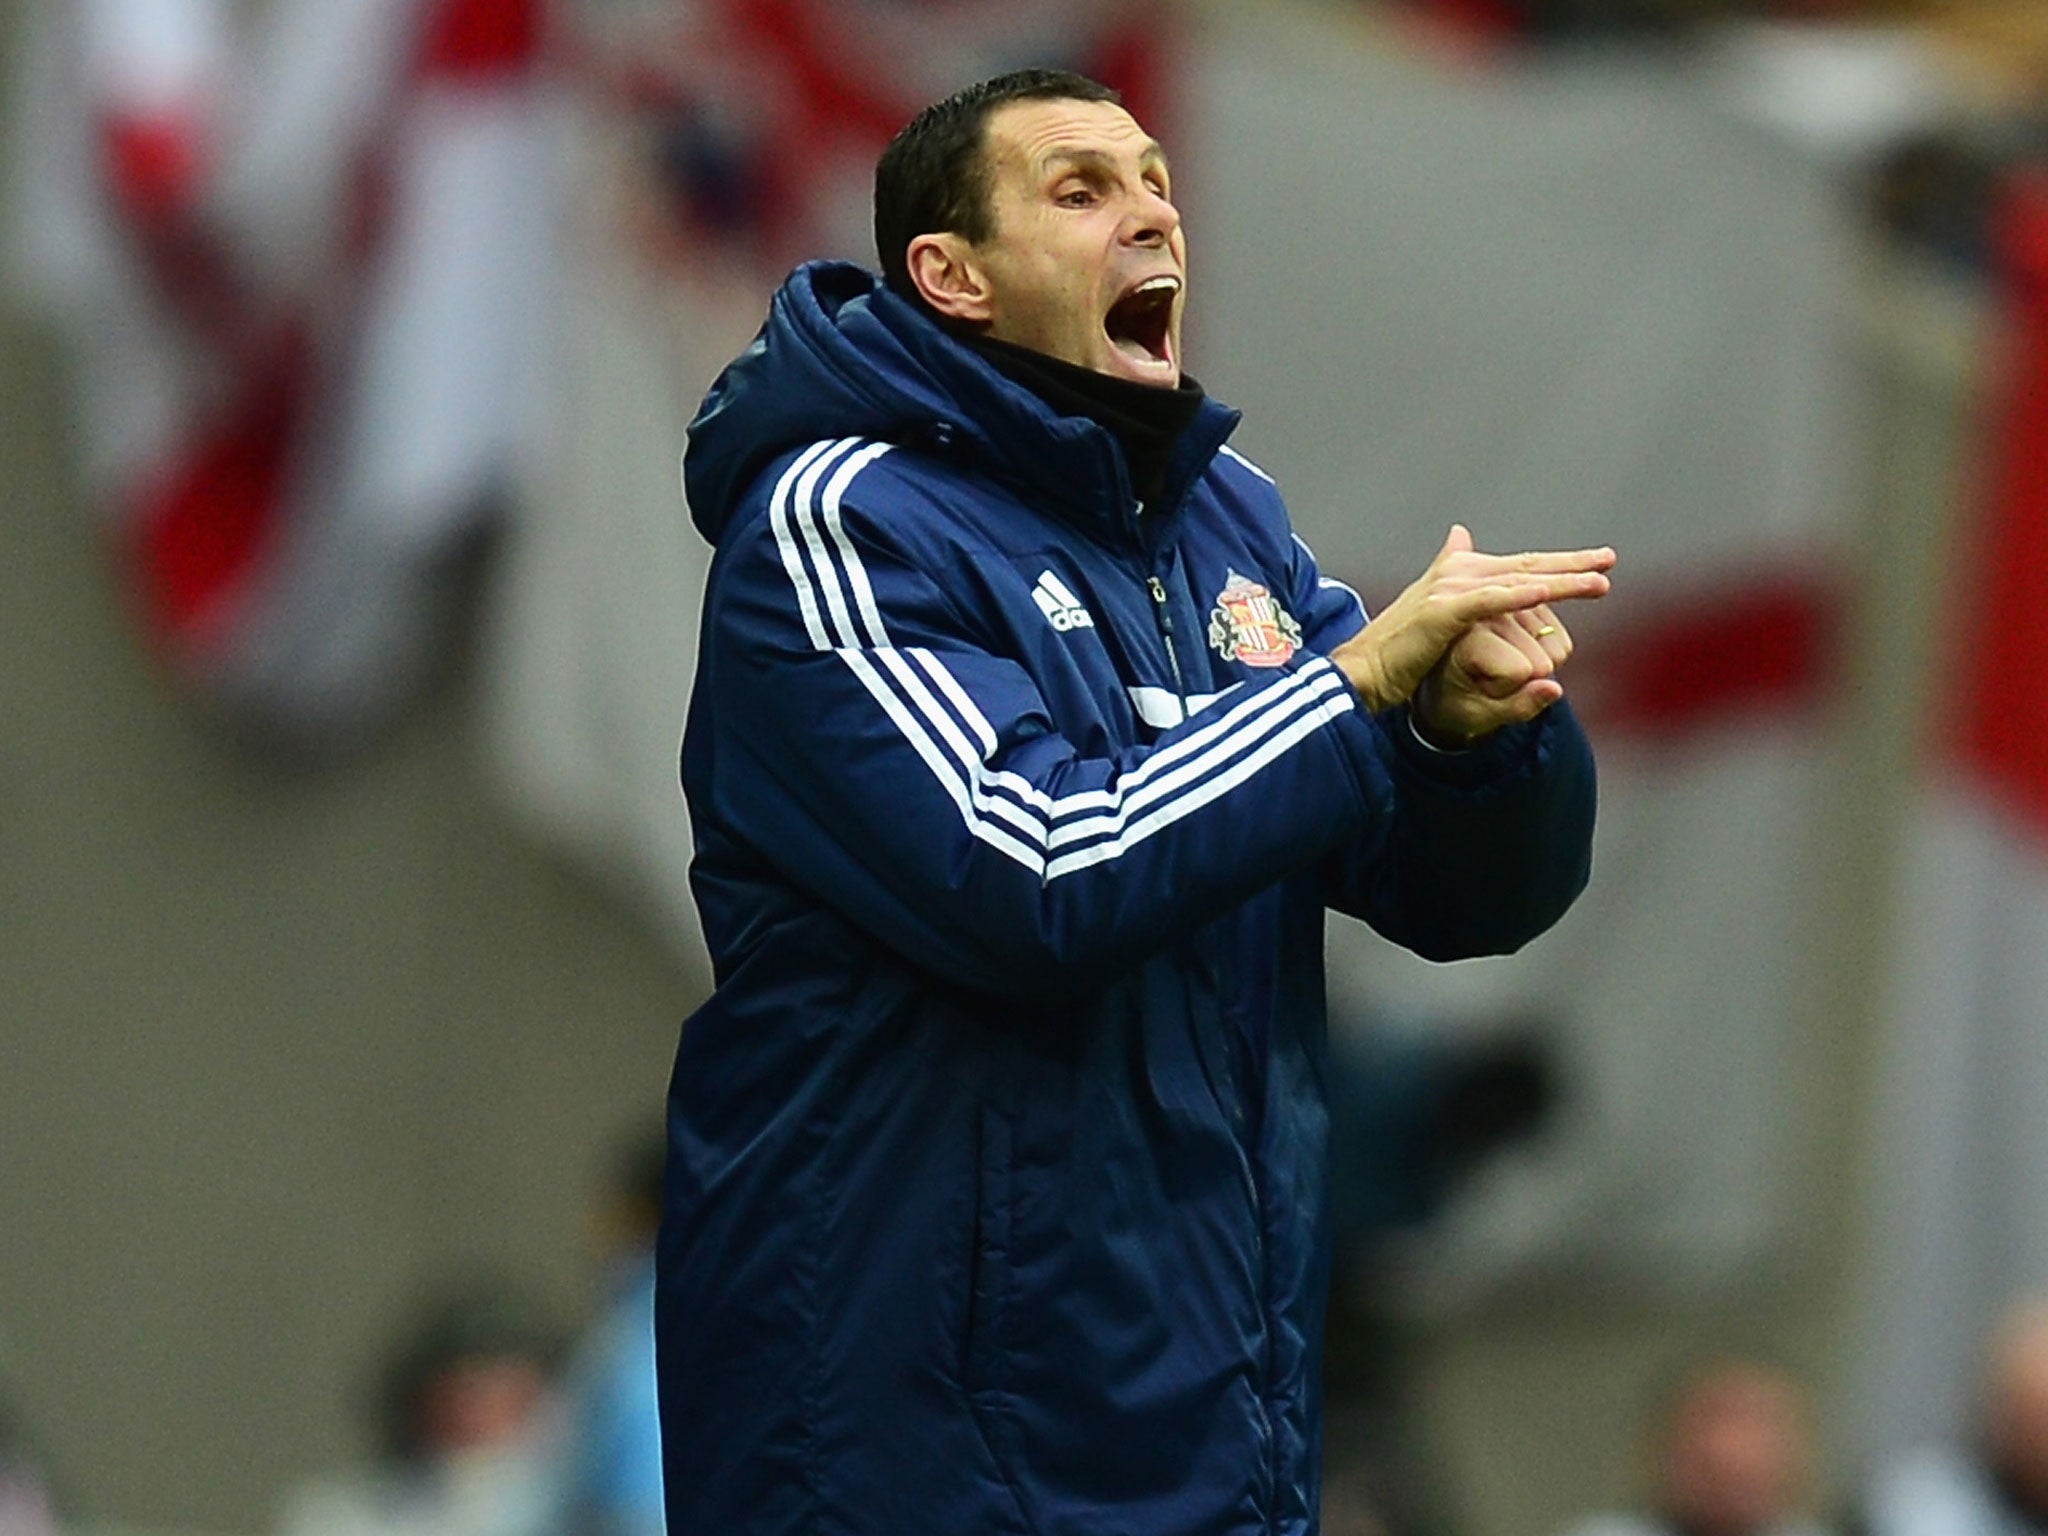 Gus Poyet makes a gesture from the touchline at Wembley